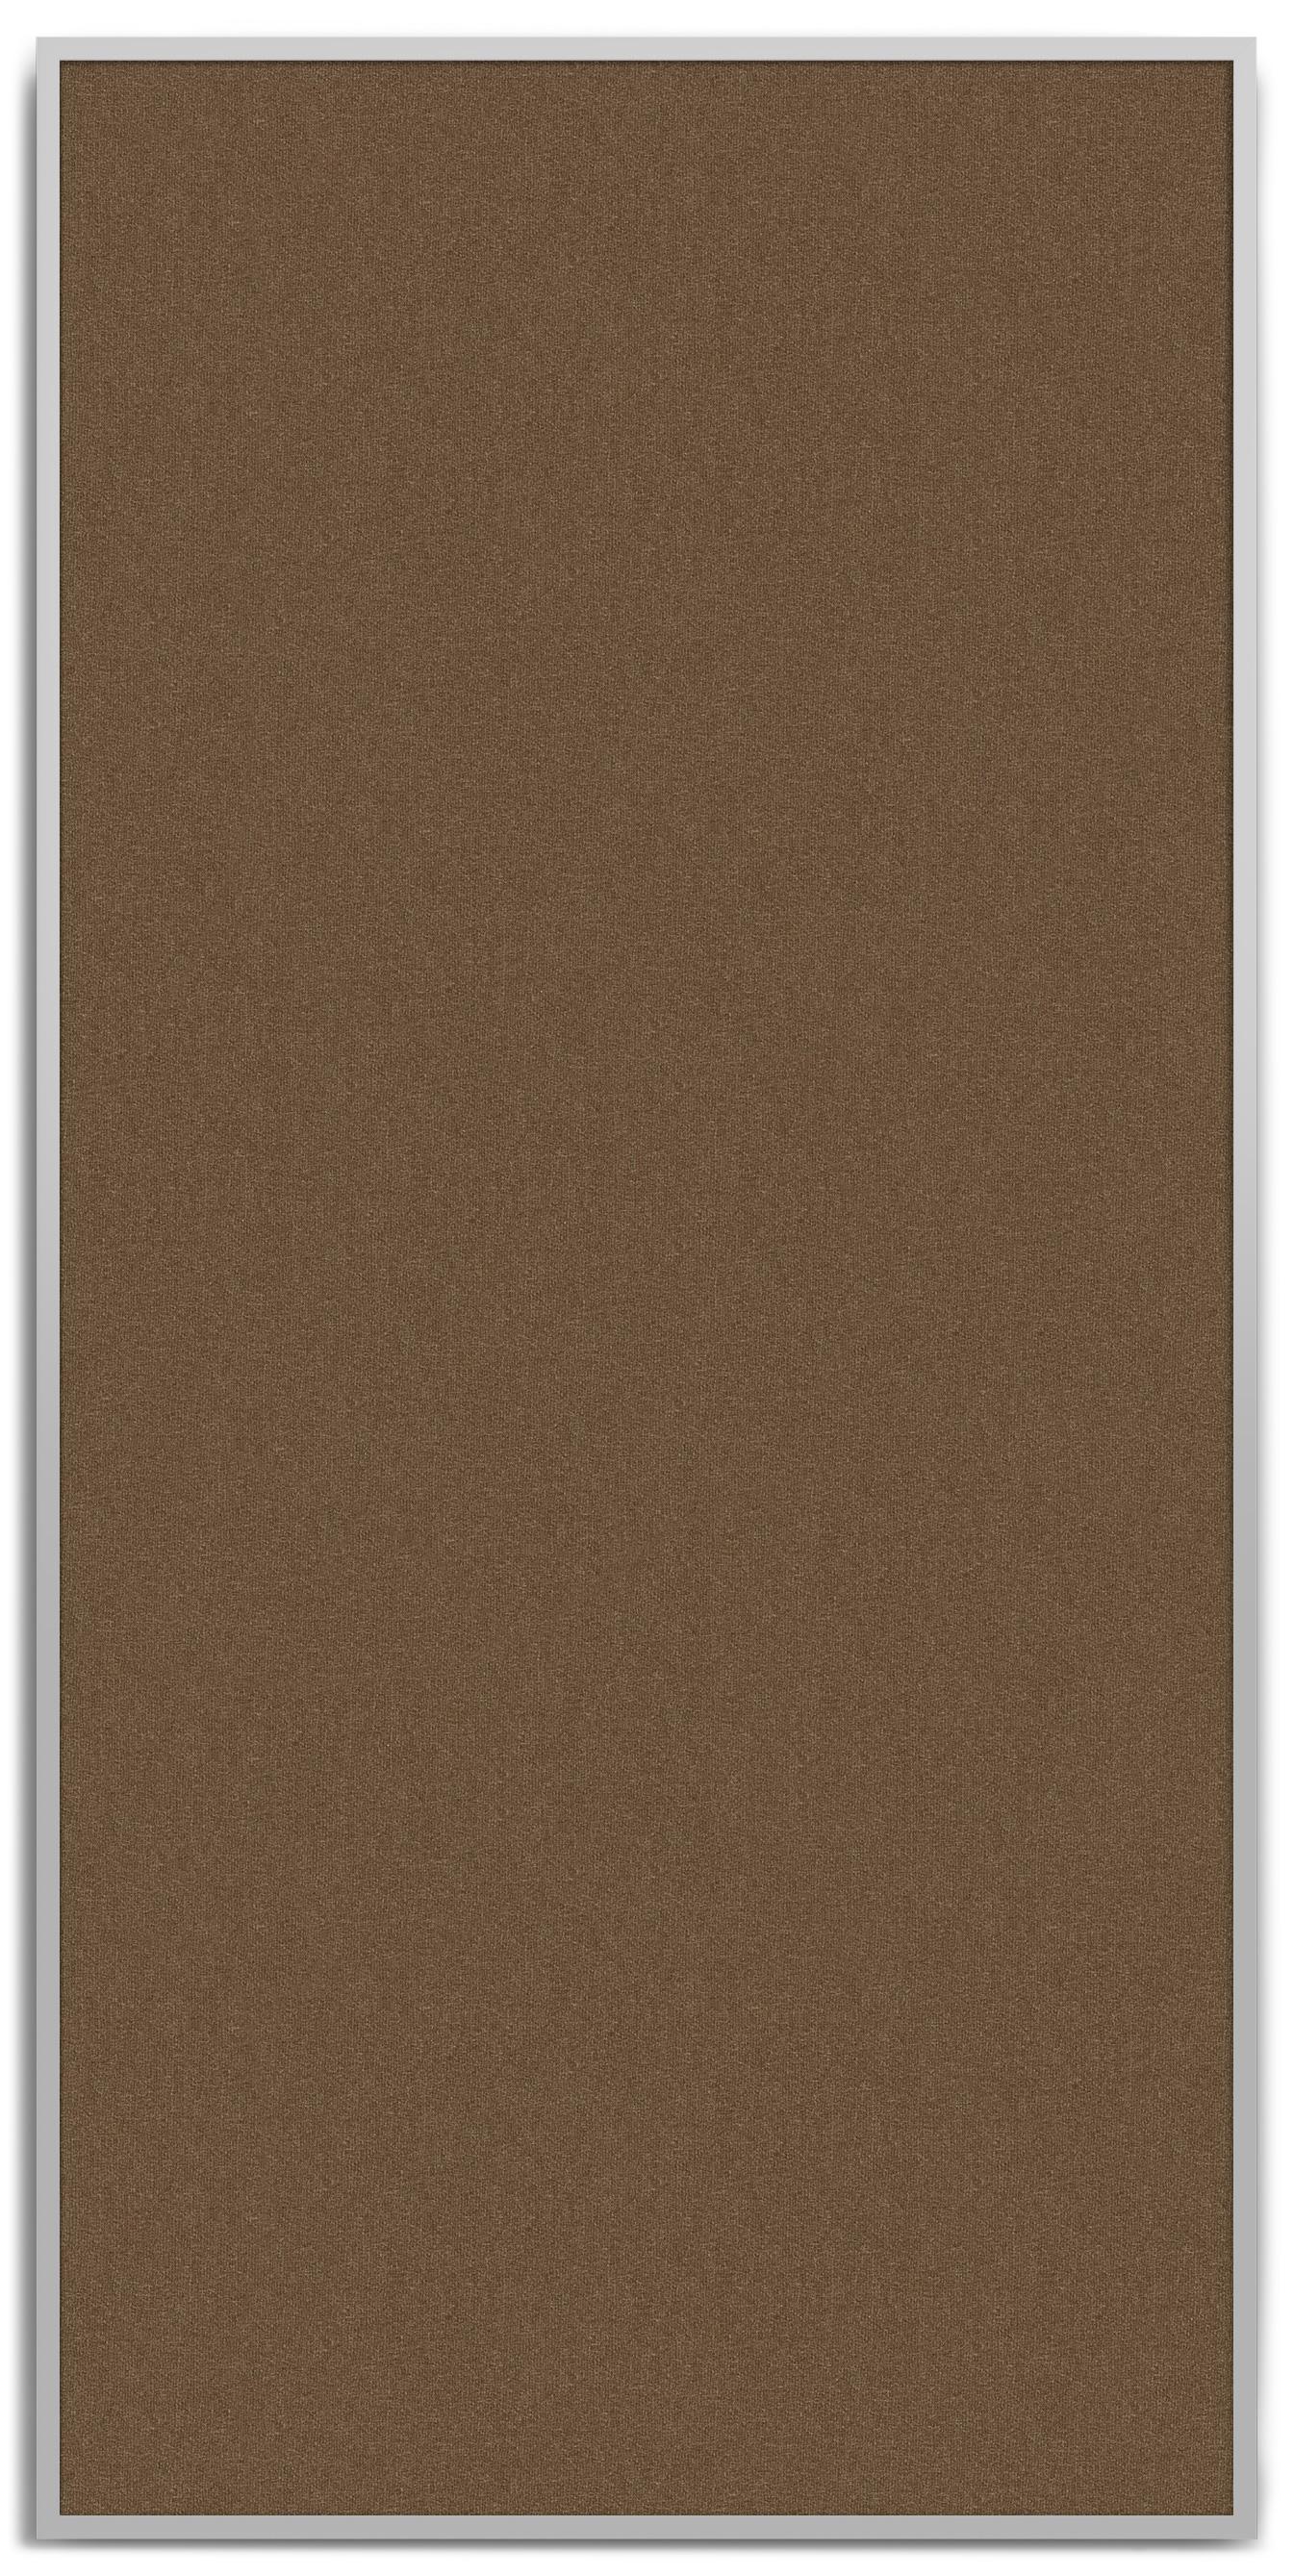 Contemporary Acustica, Opus 2, Noise Cancelling Acoustic Panel, Grey Frame For Sale